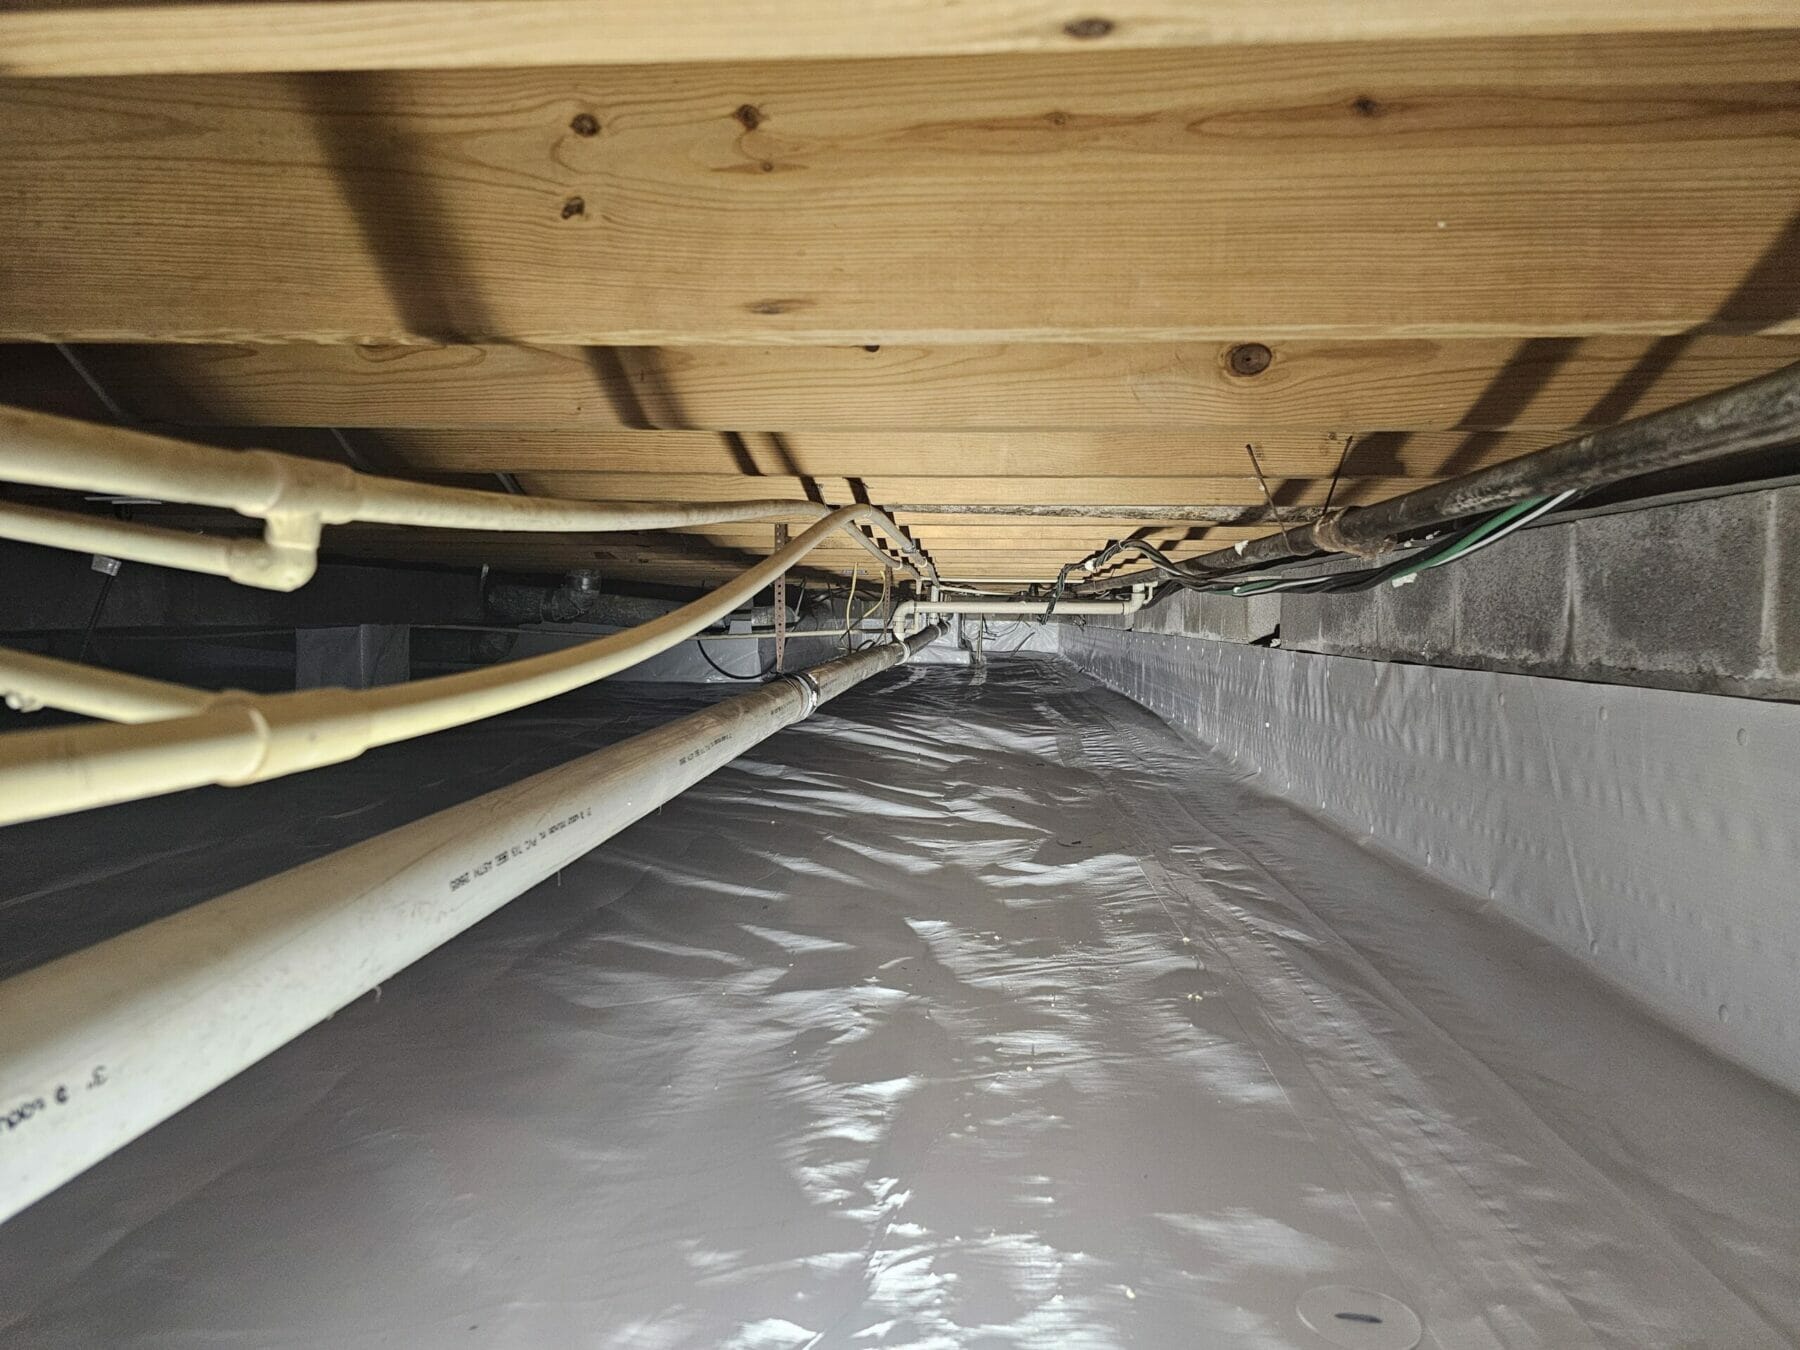 encapsulated crawlspace and pipes